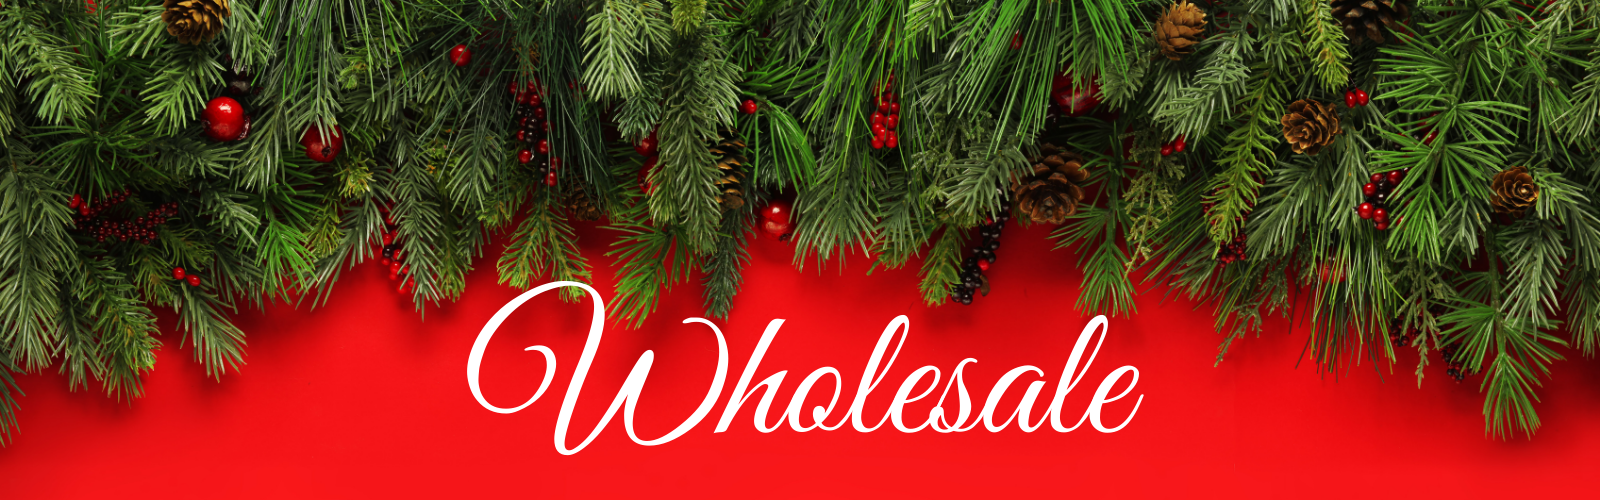 Wholesale Christmas Trees, fresh holiday Wreaths & gift cards for